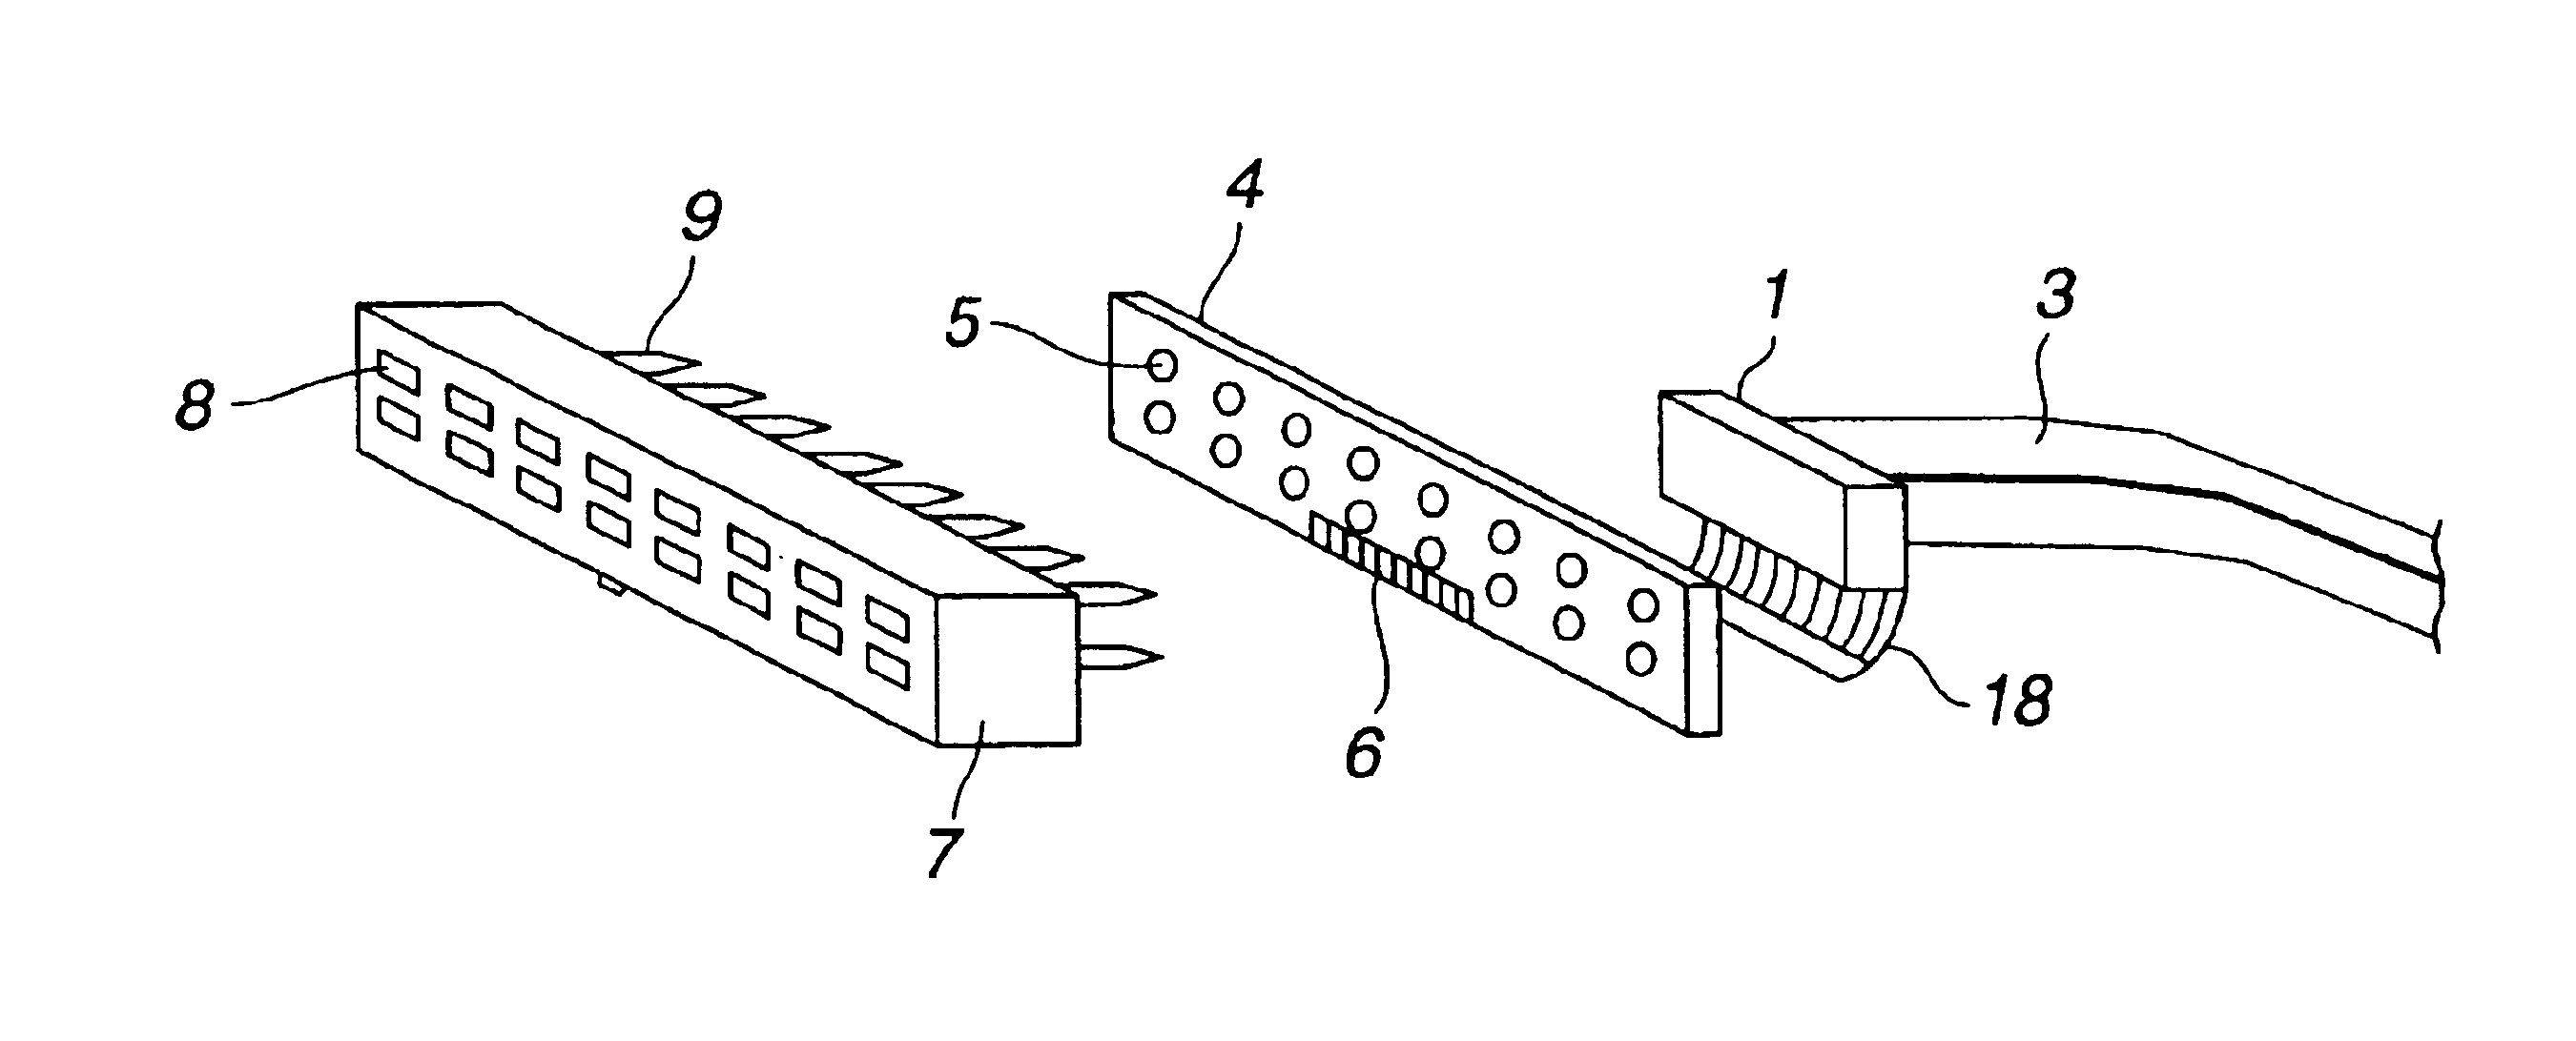 Optical wiring device